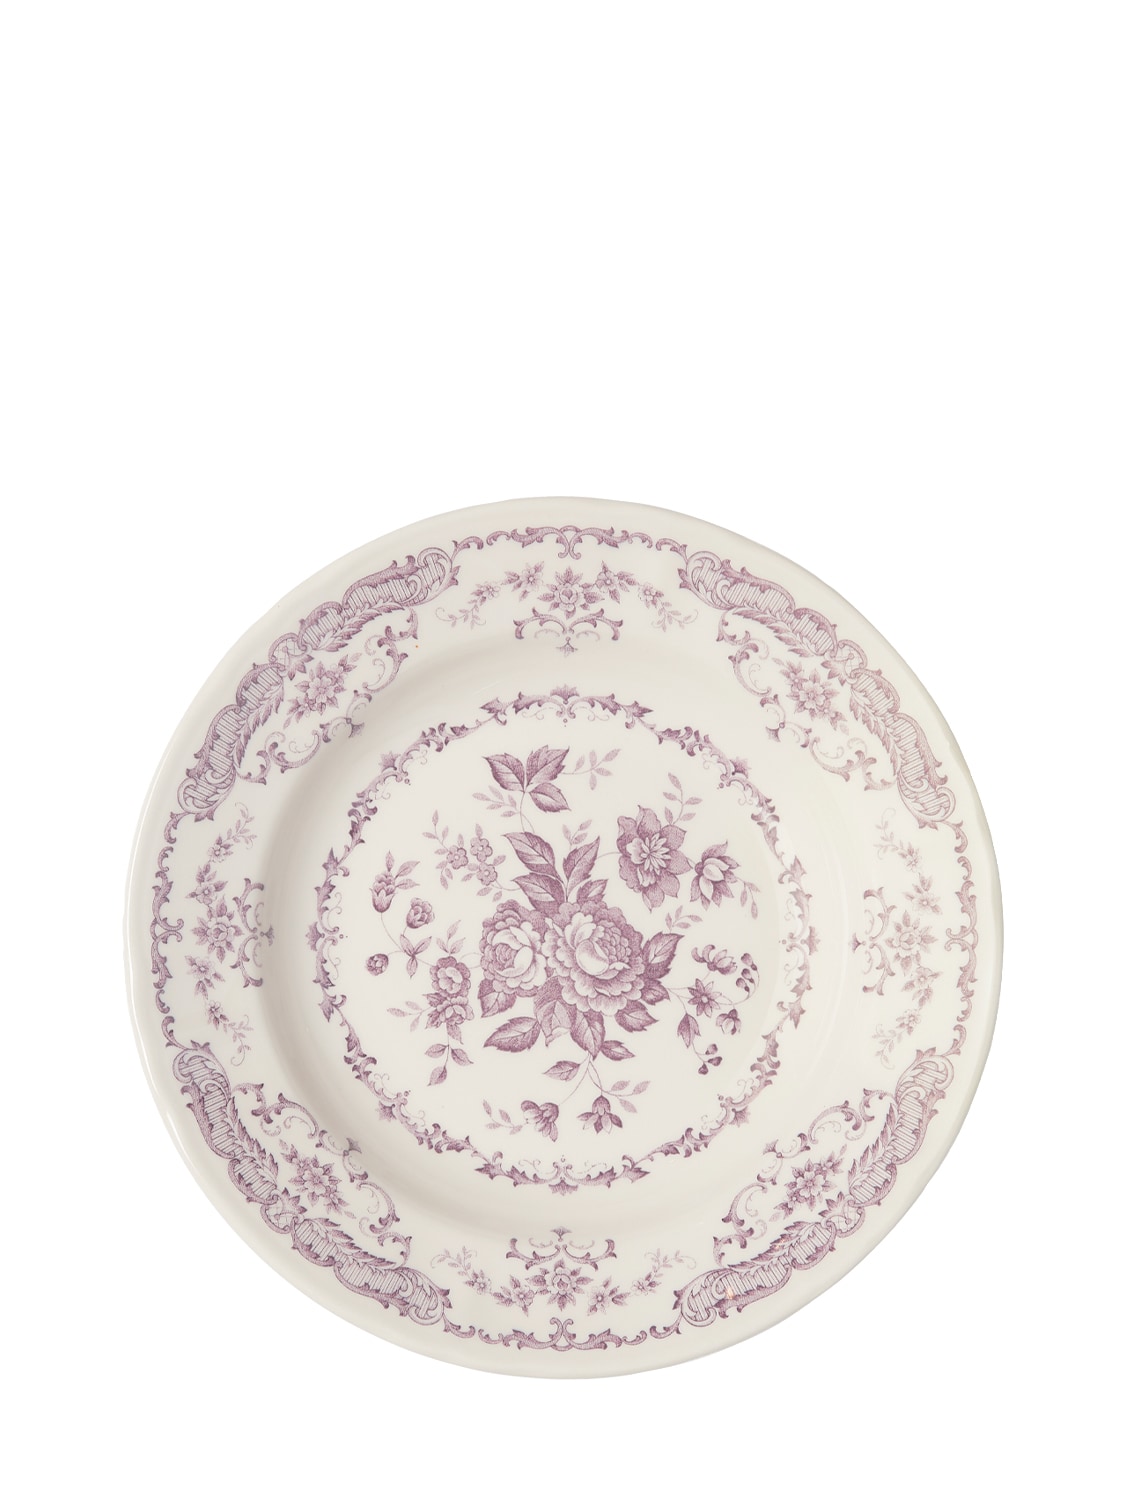 Bitossi Home Set Of 6 Ironstone Dishes In White,violet